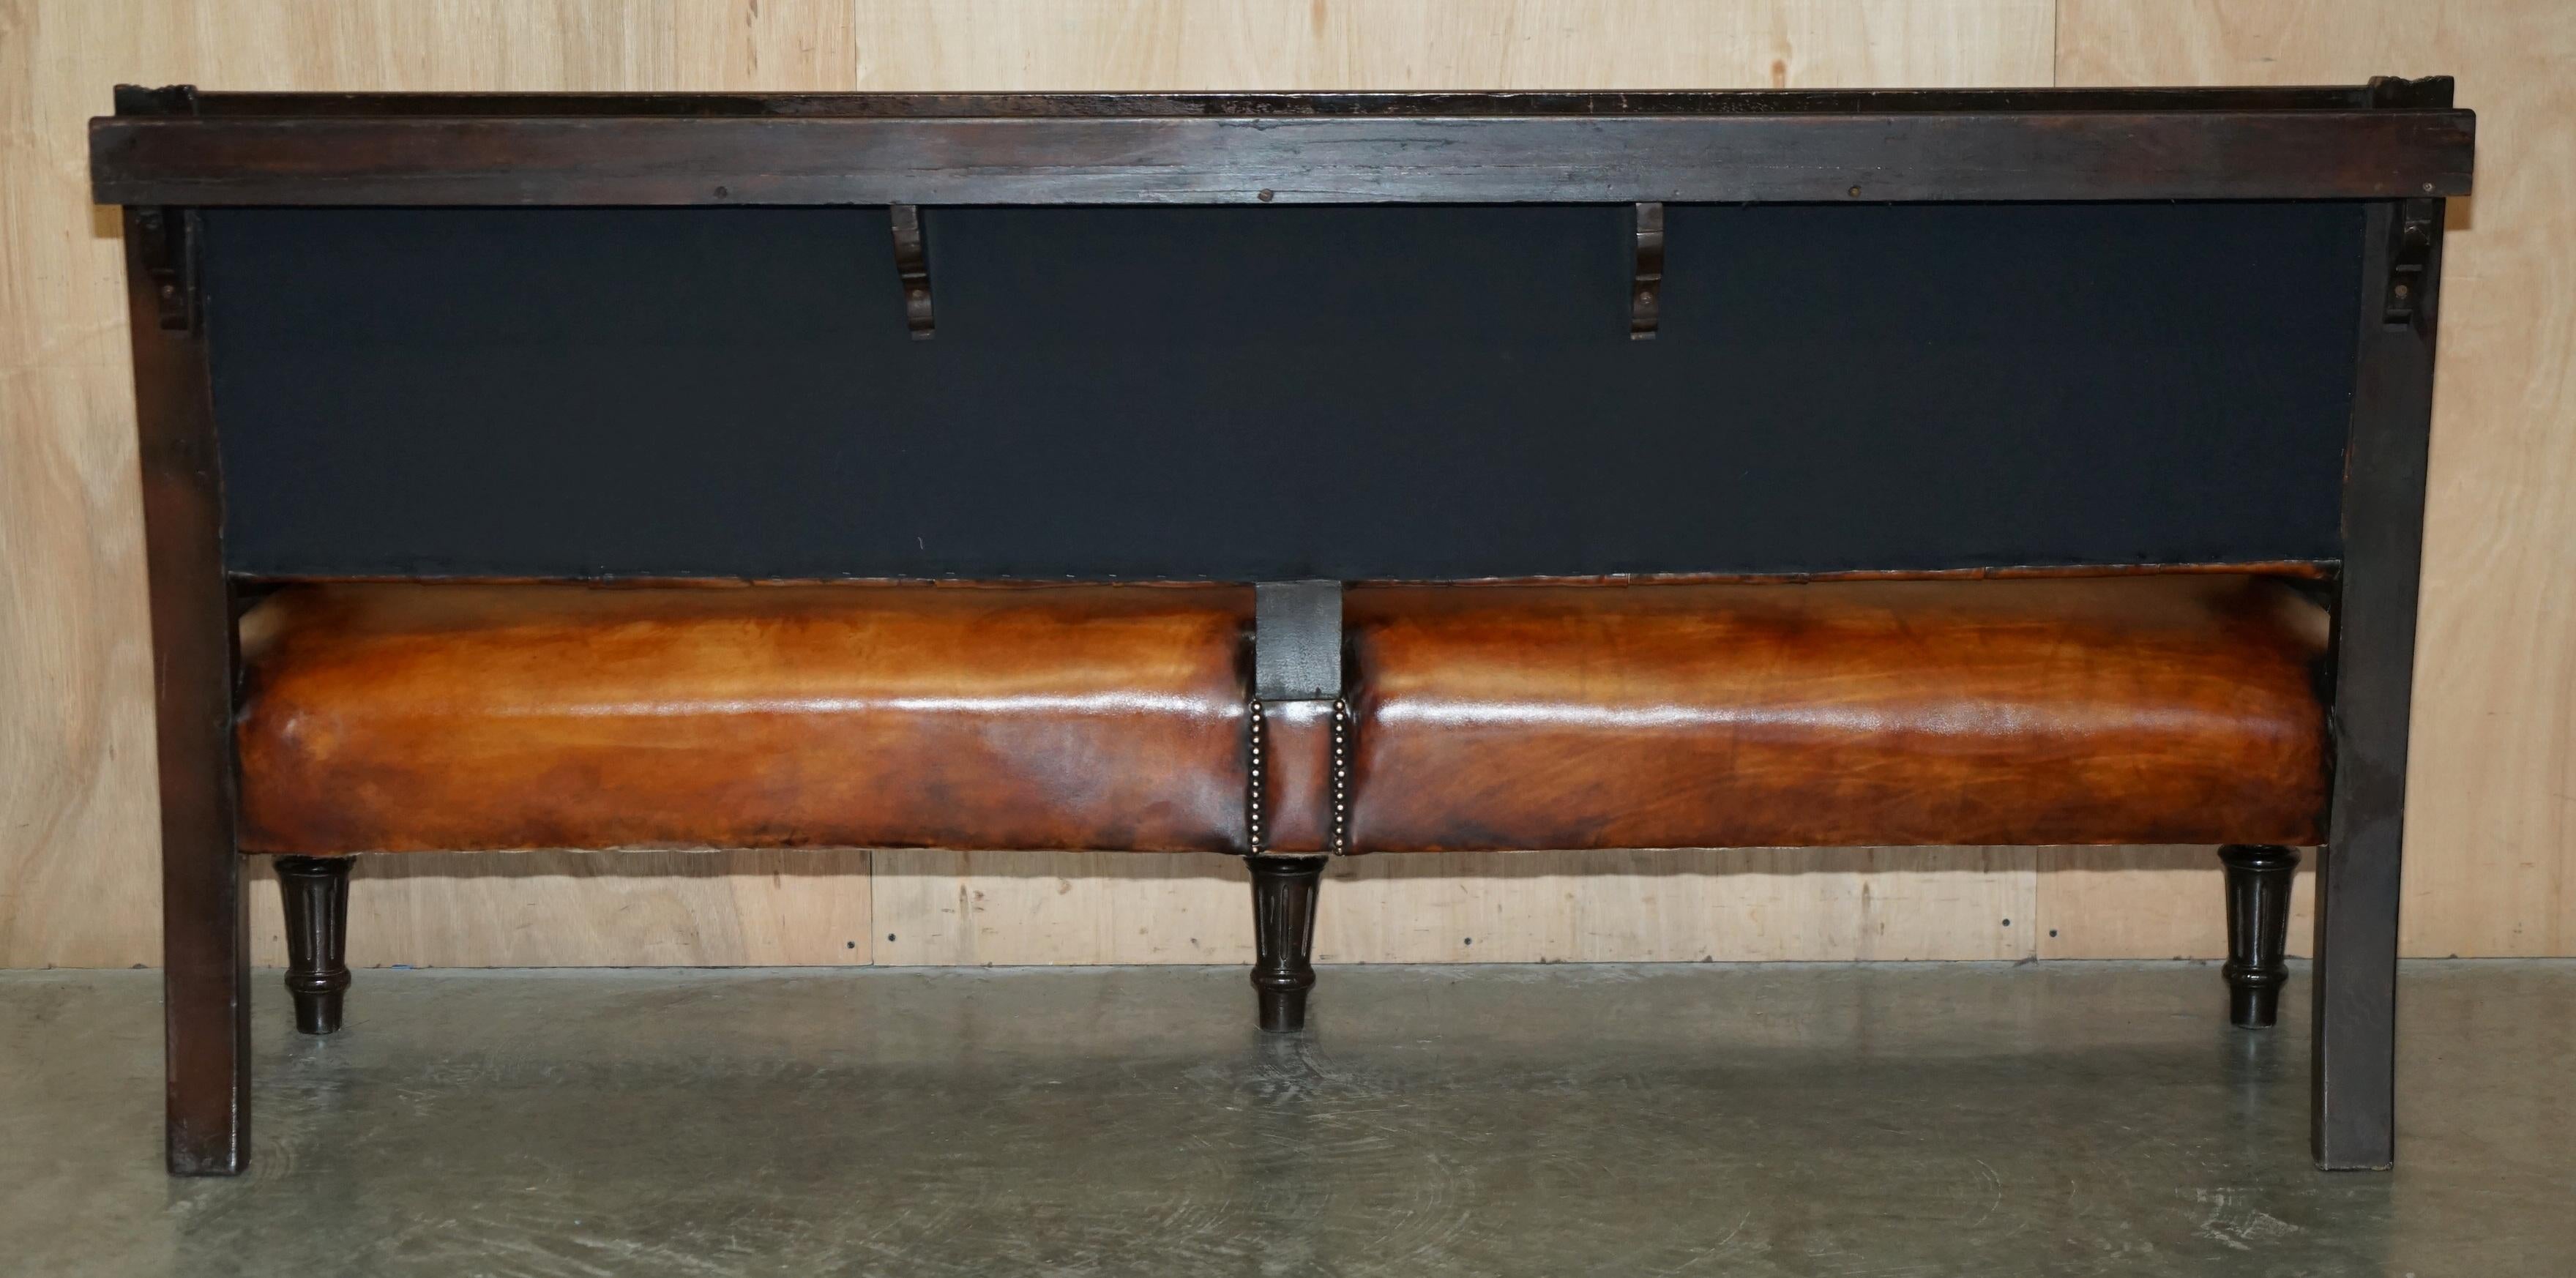 1 OF 4 RESTORED ANTIQUE ViCTORIAN CHESTERFIELD LEATHER SNOOKER HALL PUB BENCHES For Sale 11